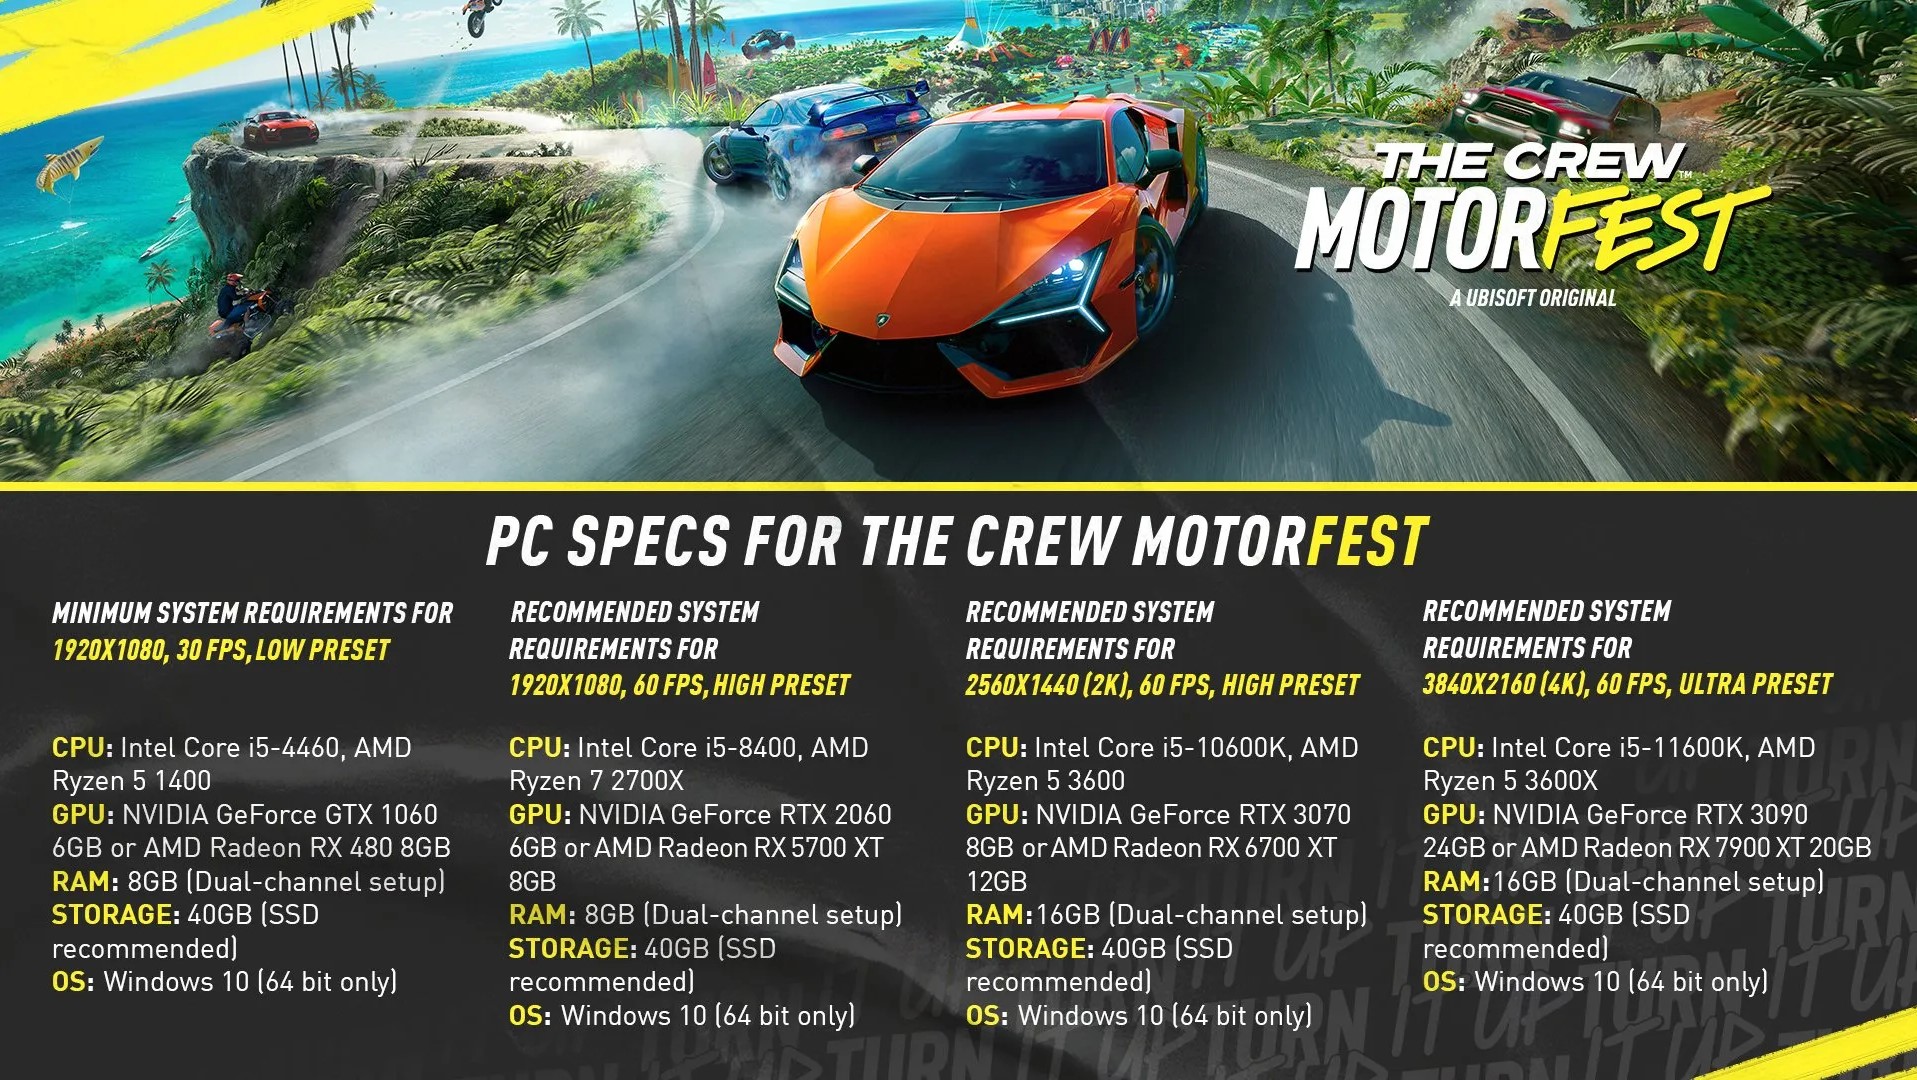 Some questions about The Crew Motorfest : r/The_Crew